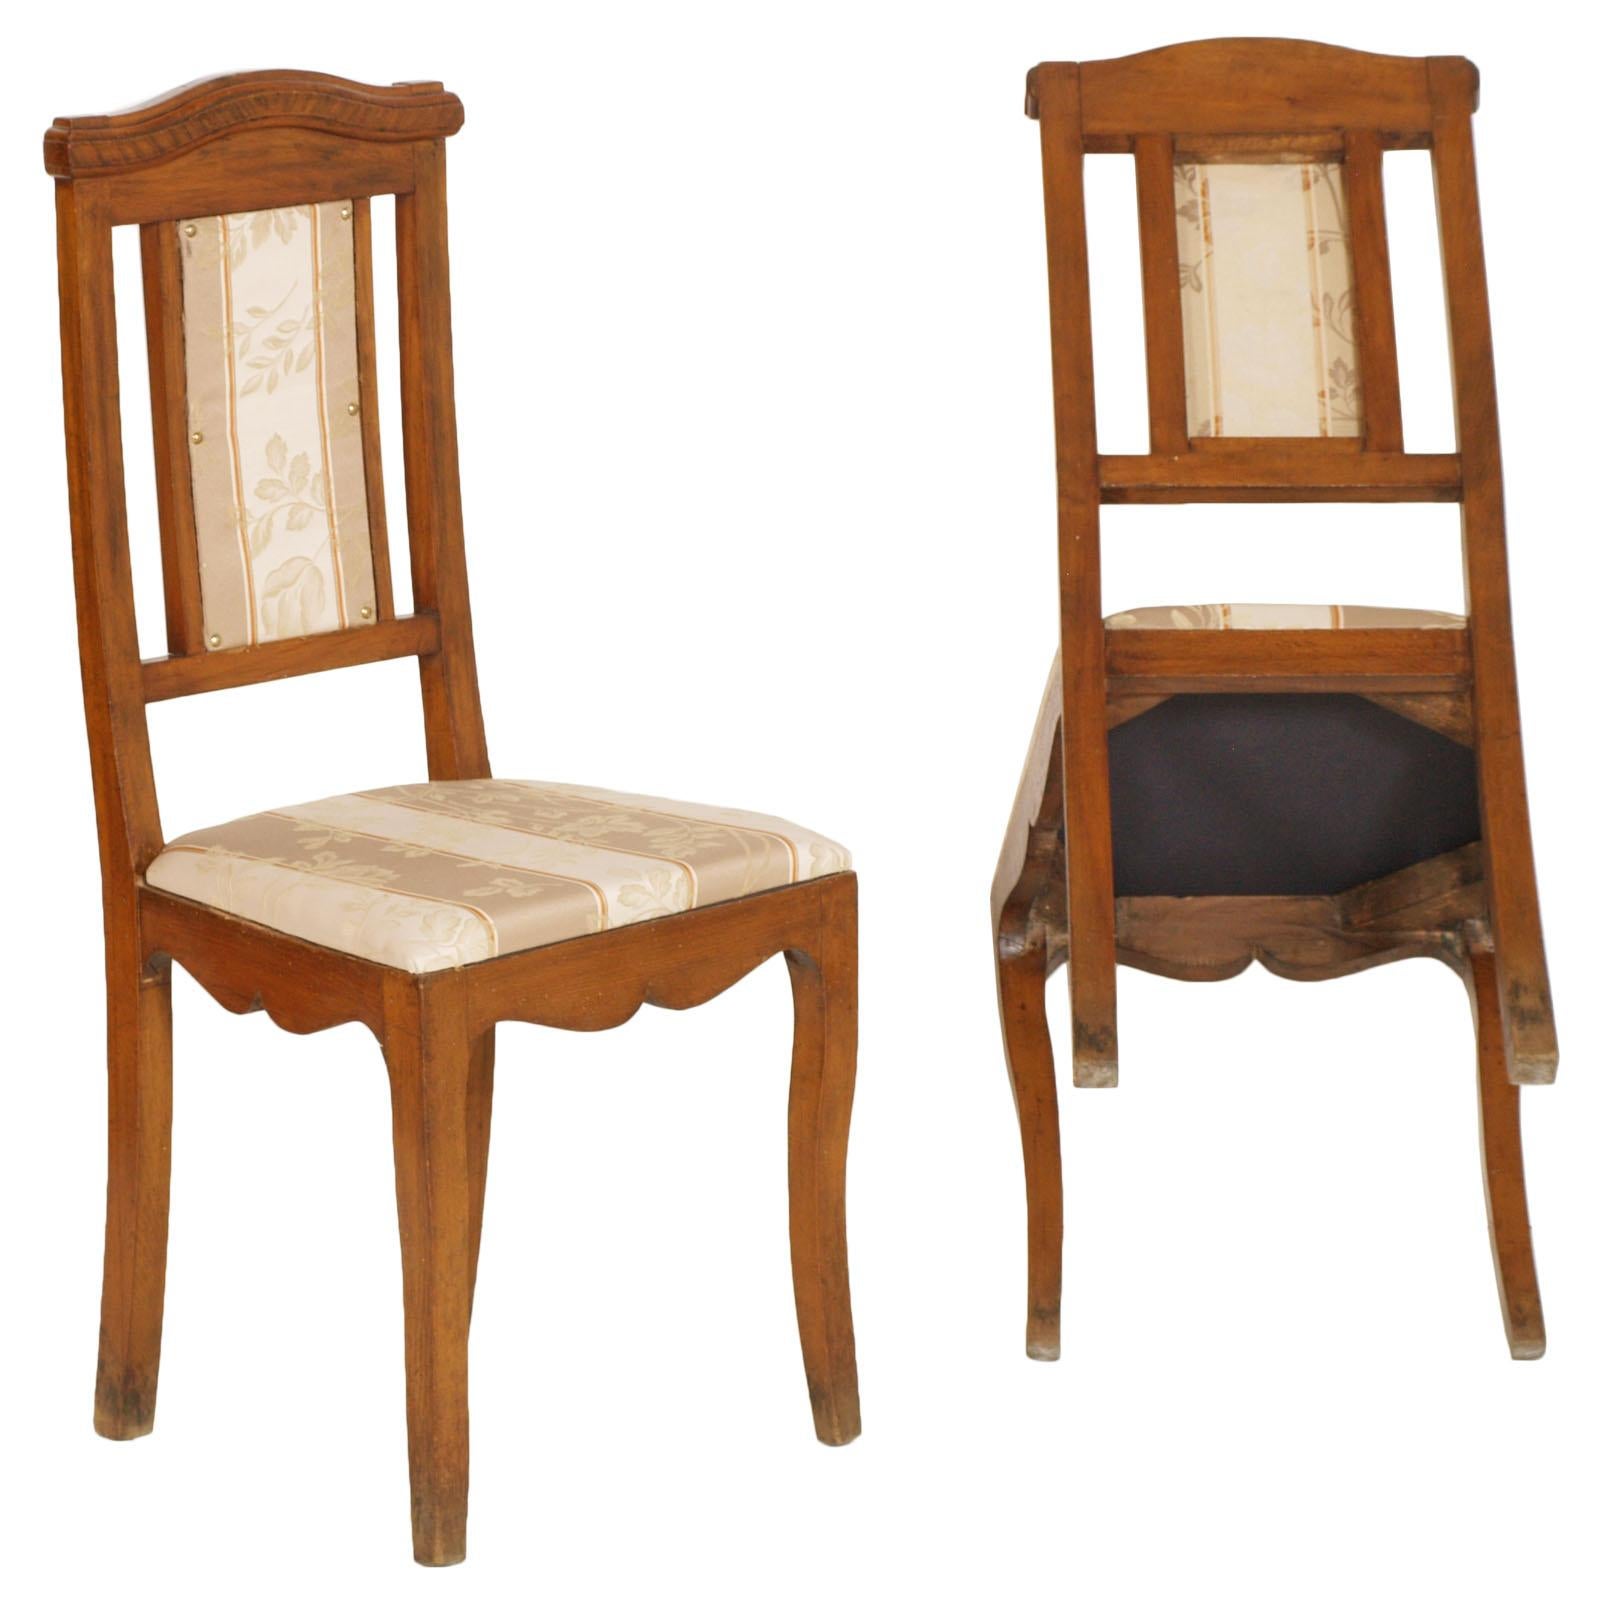 Early 20th Century Art Nouveau Pair of Side Chairs in Walnut, Restored & New Upholstered For Sale